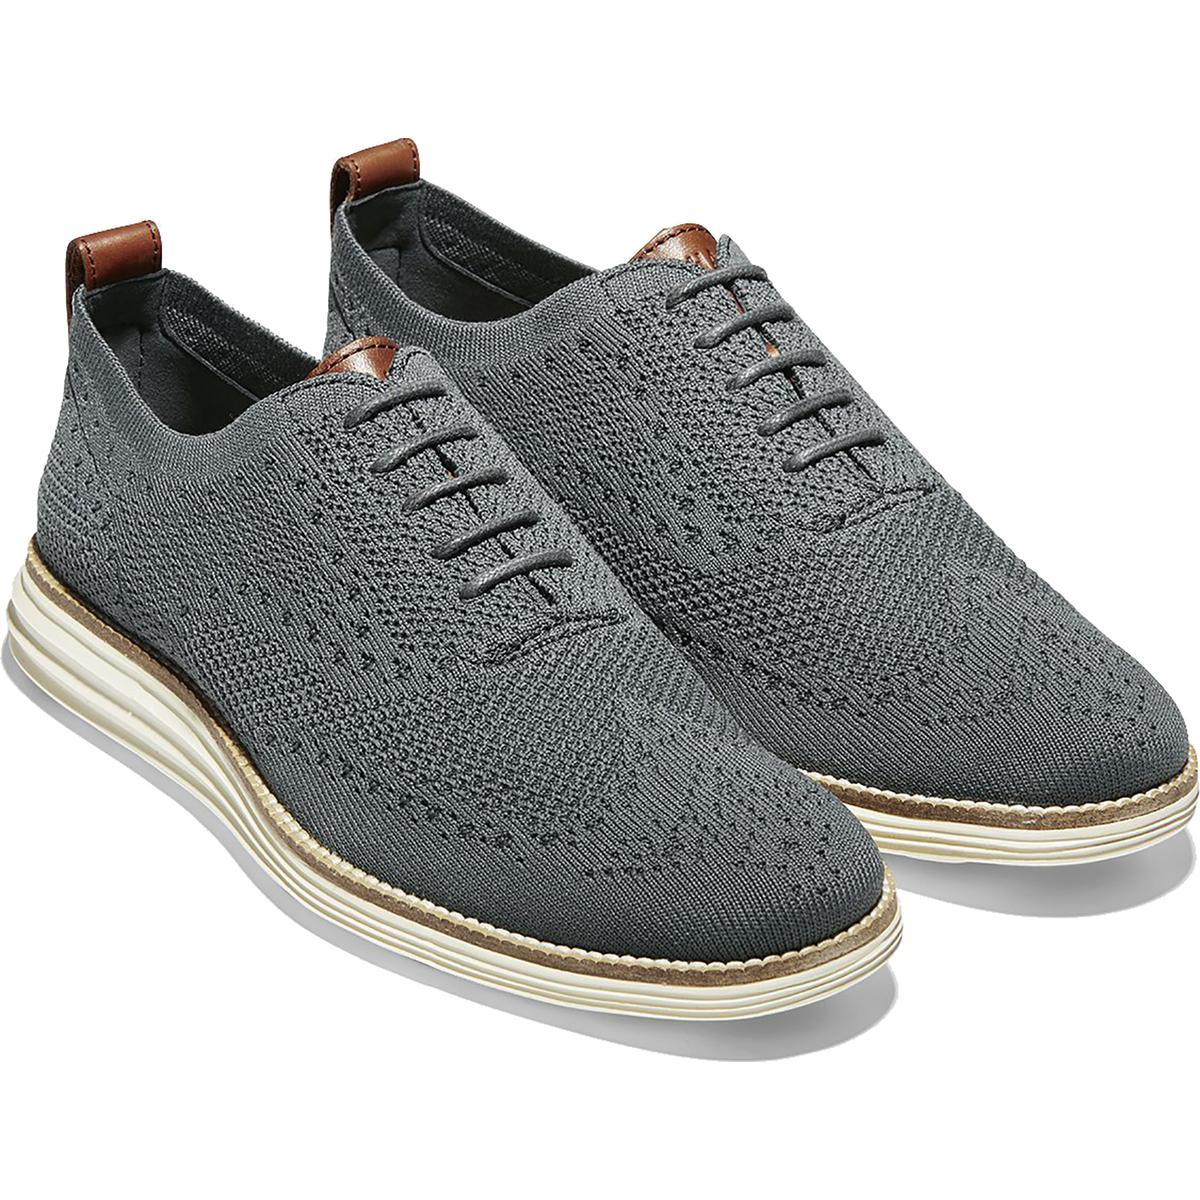 Cole Haan Mens OriginalGrand Lace-Up Knit Walking Shoes Sneakers BHFO ...